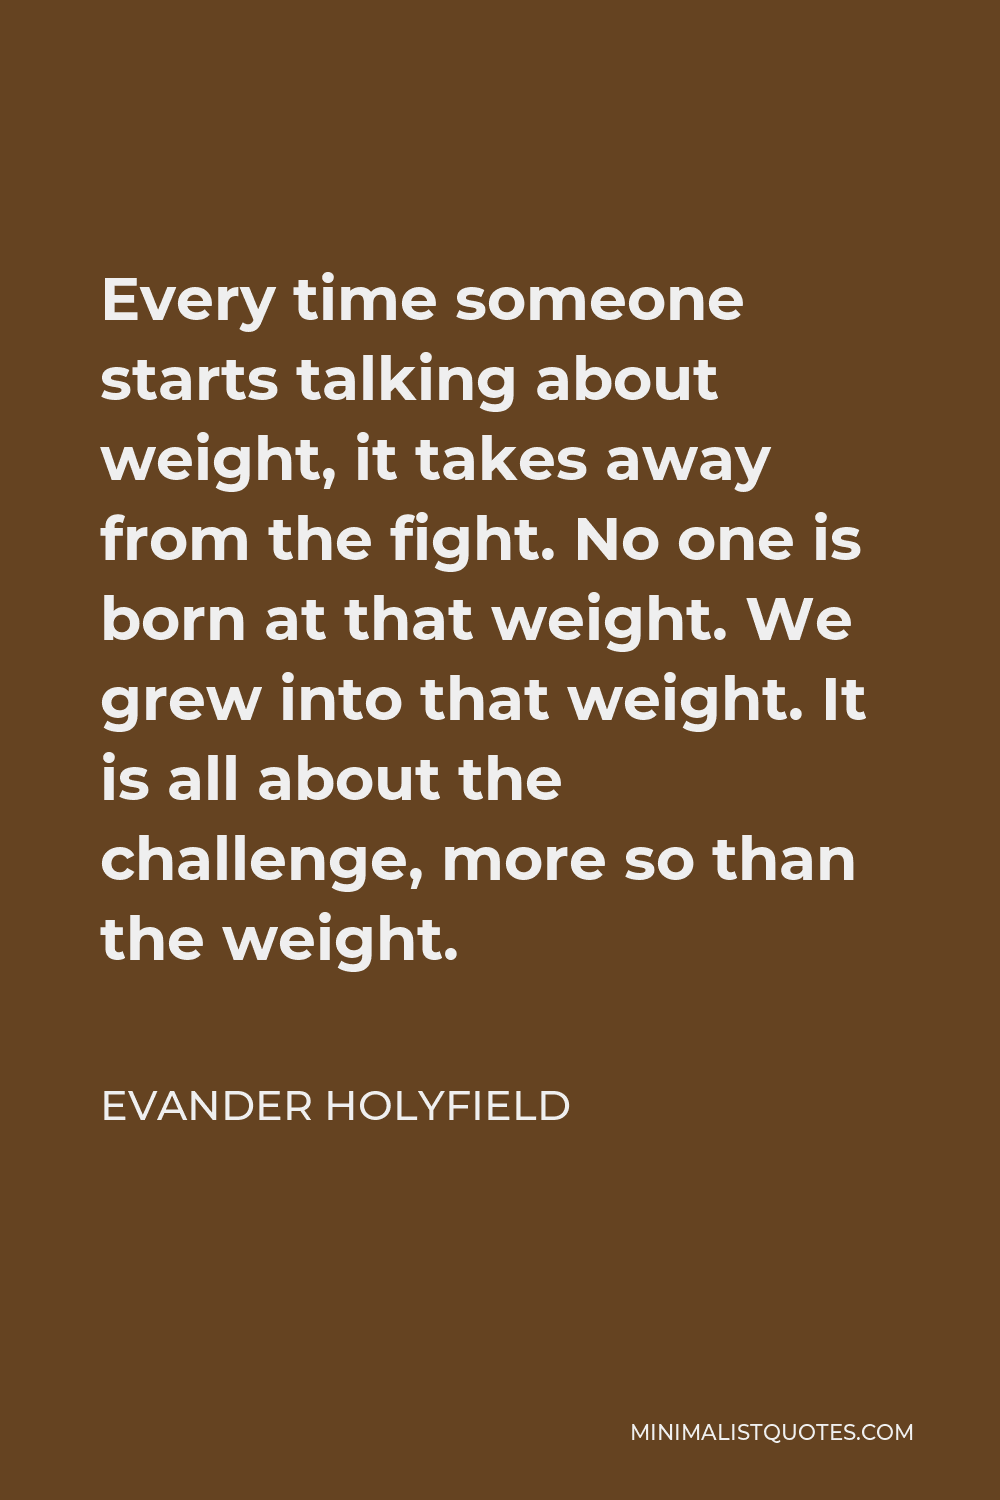 Evander Holyfield Quote - Every time someone starts talking about weight, it takes away from the fight. No one is born at that weight. We grew into that weight. It is all about the challenge, more so than the weight.